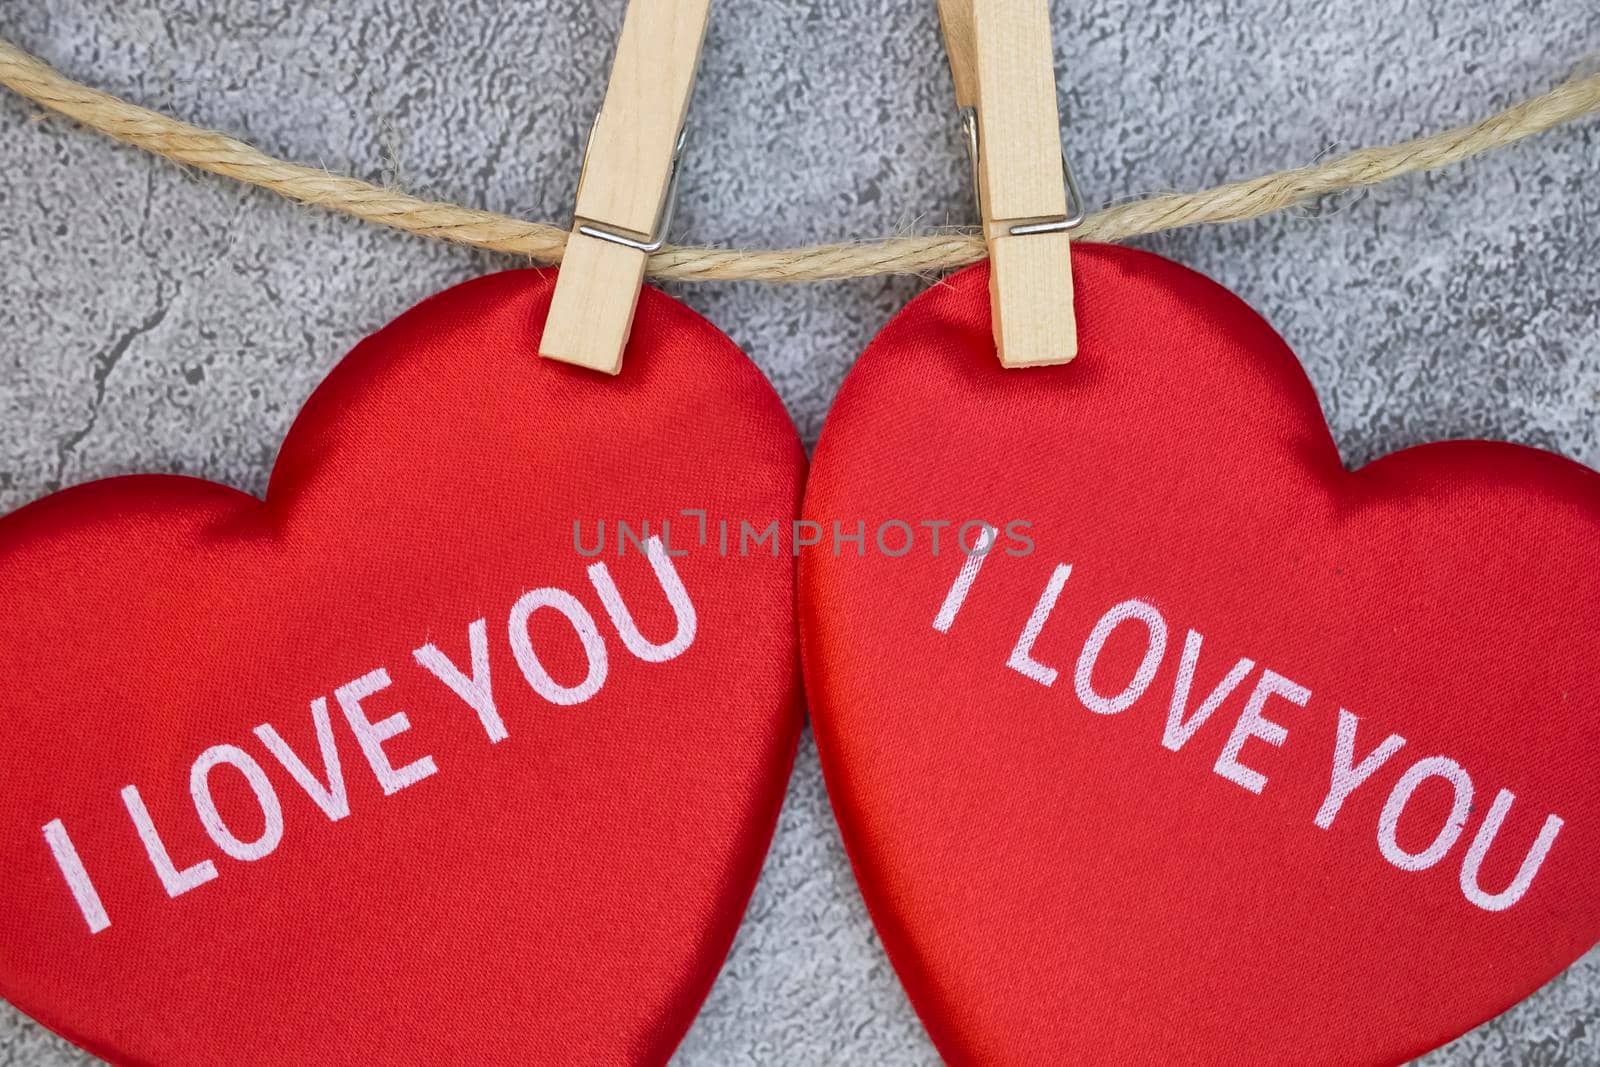 Words of love for special celebrations and valentines day